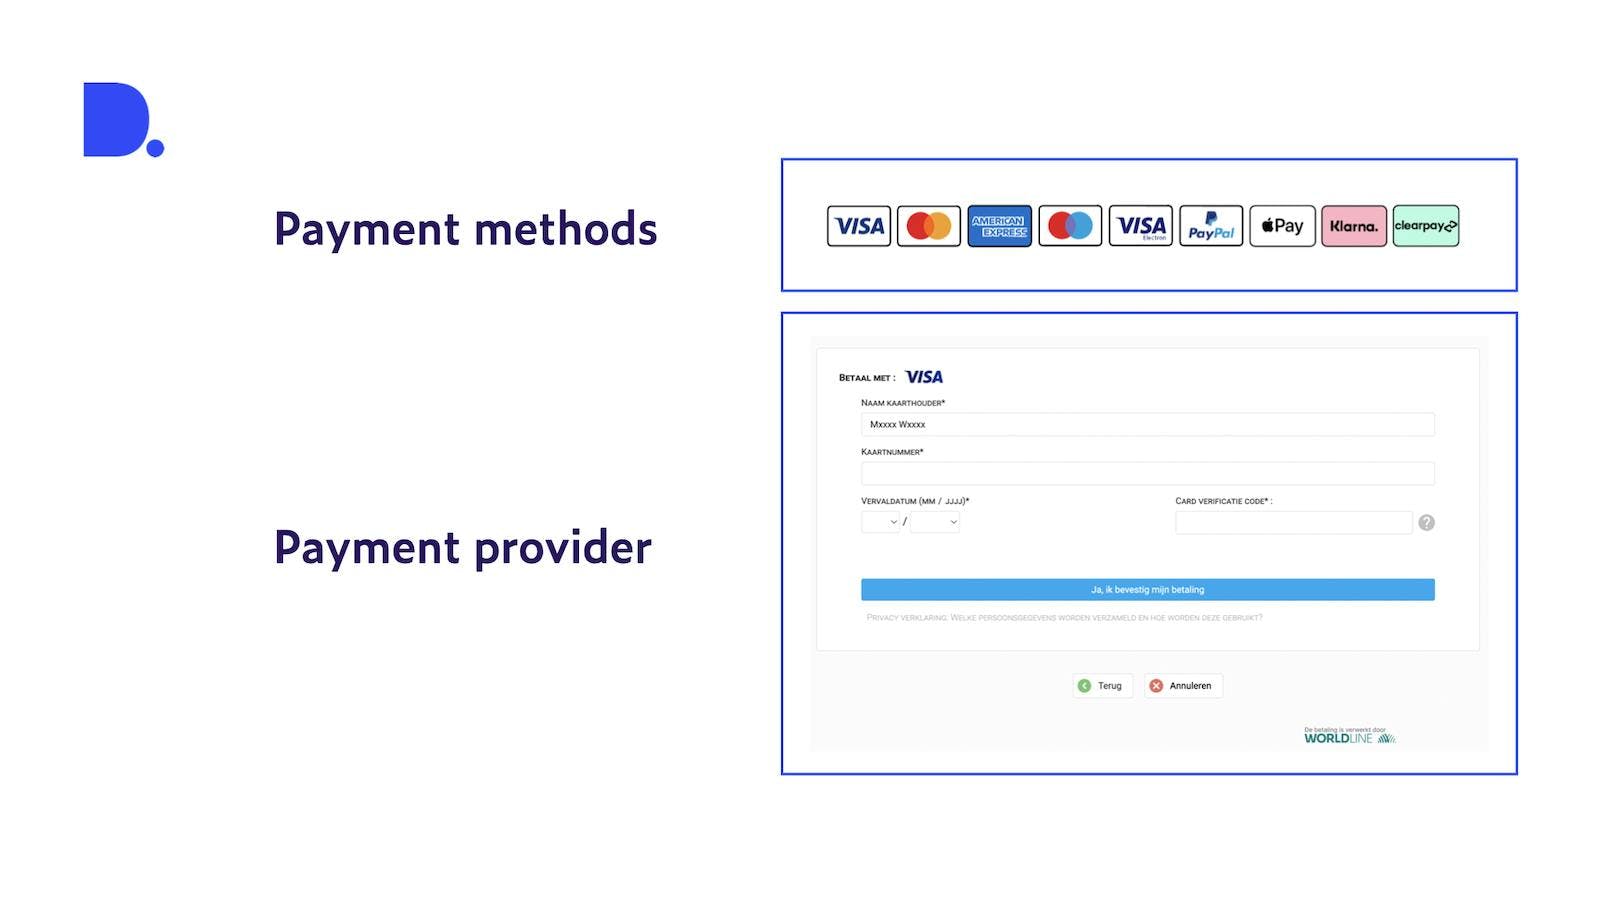 Example of payment methods and the payment service provider in selected online shops.